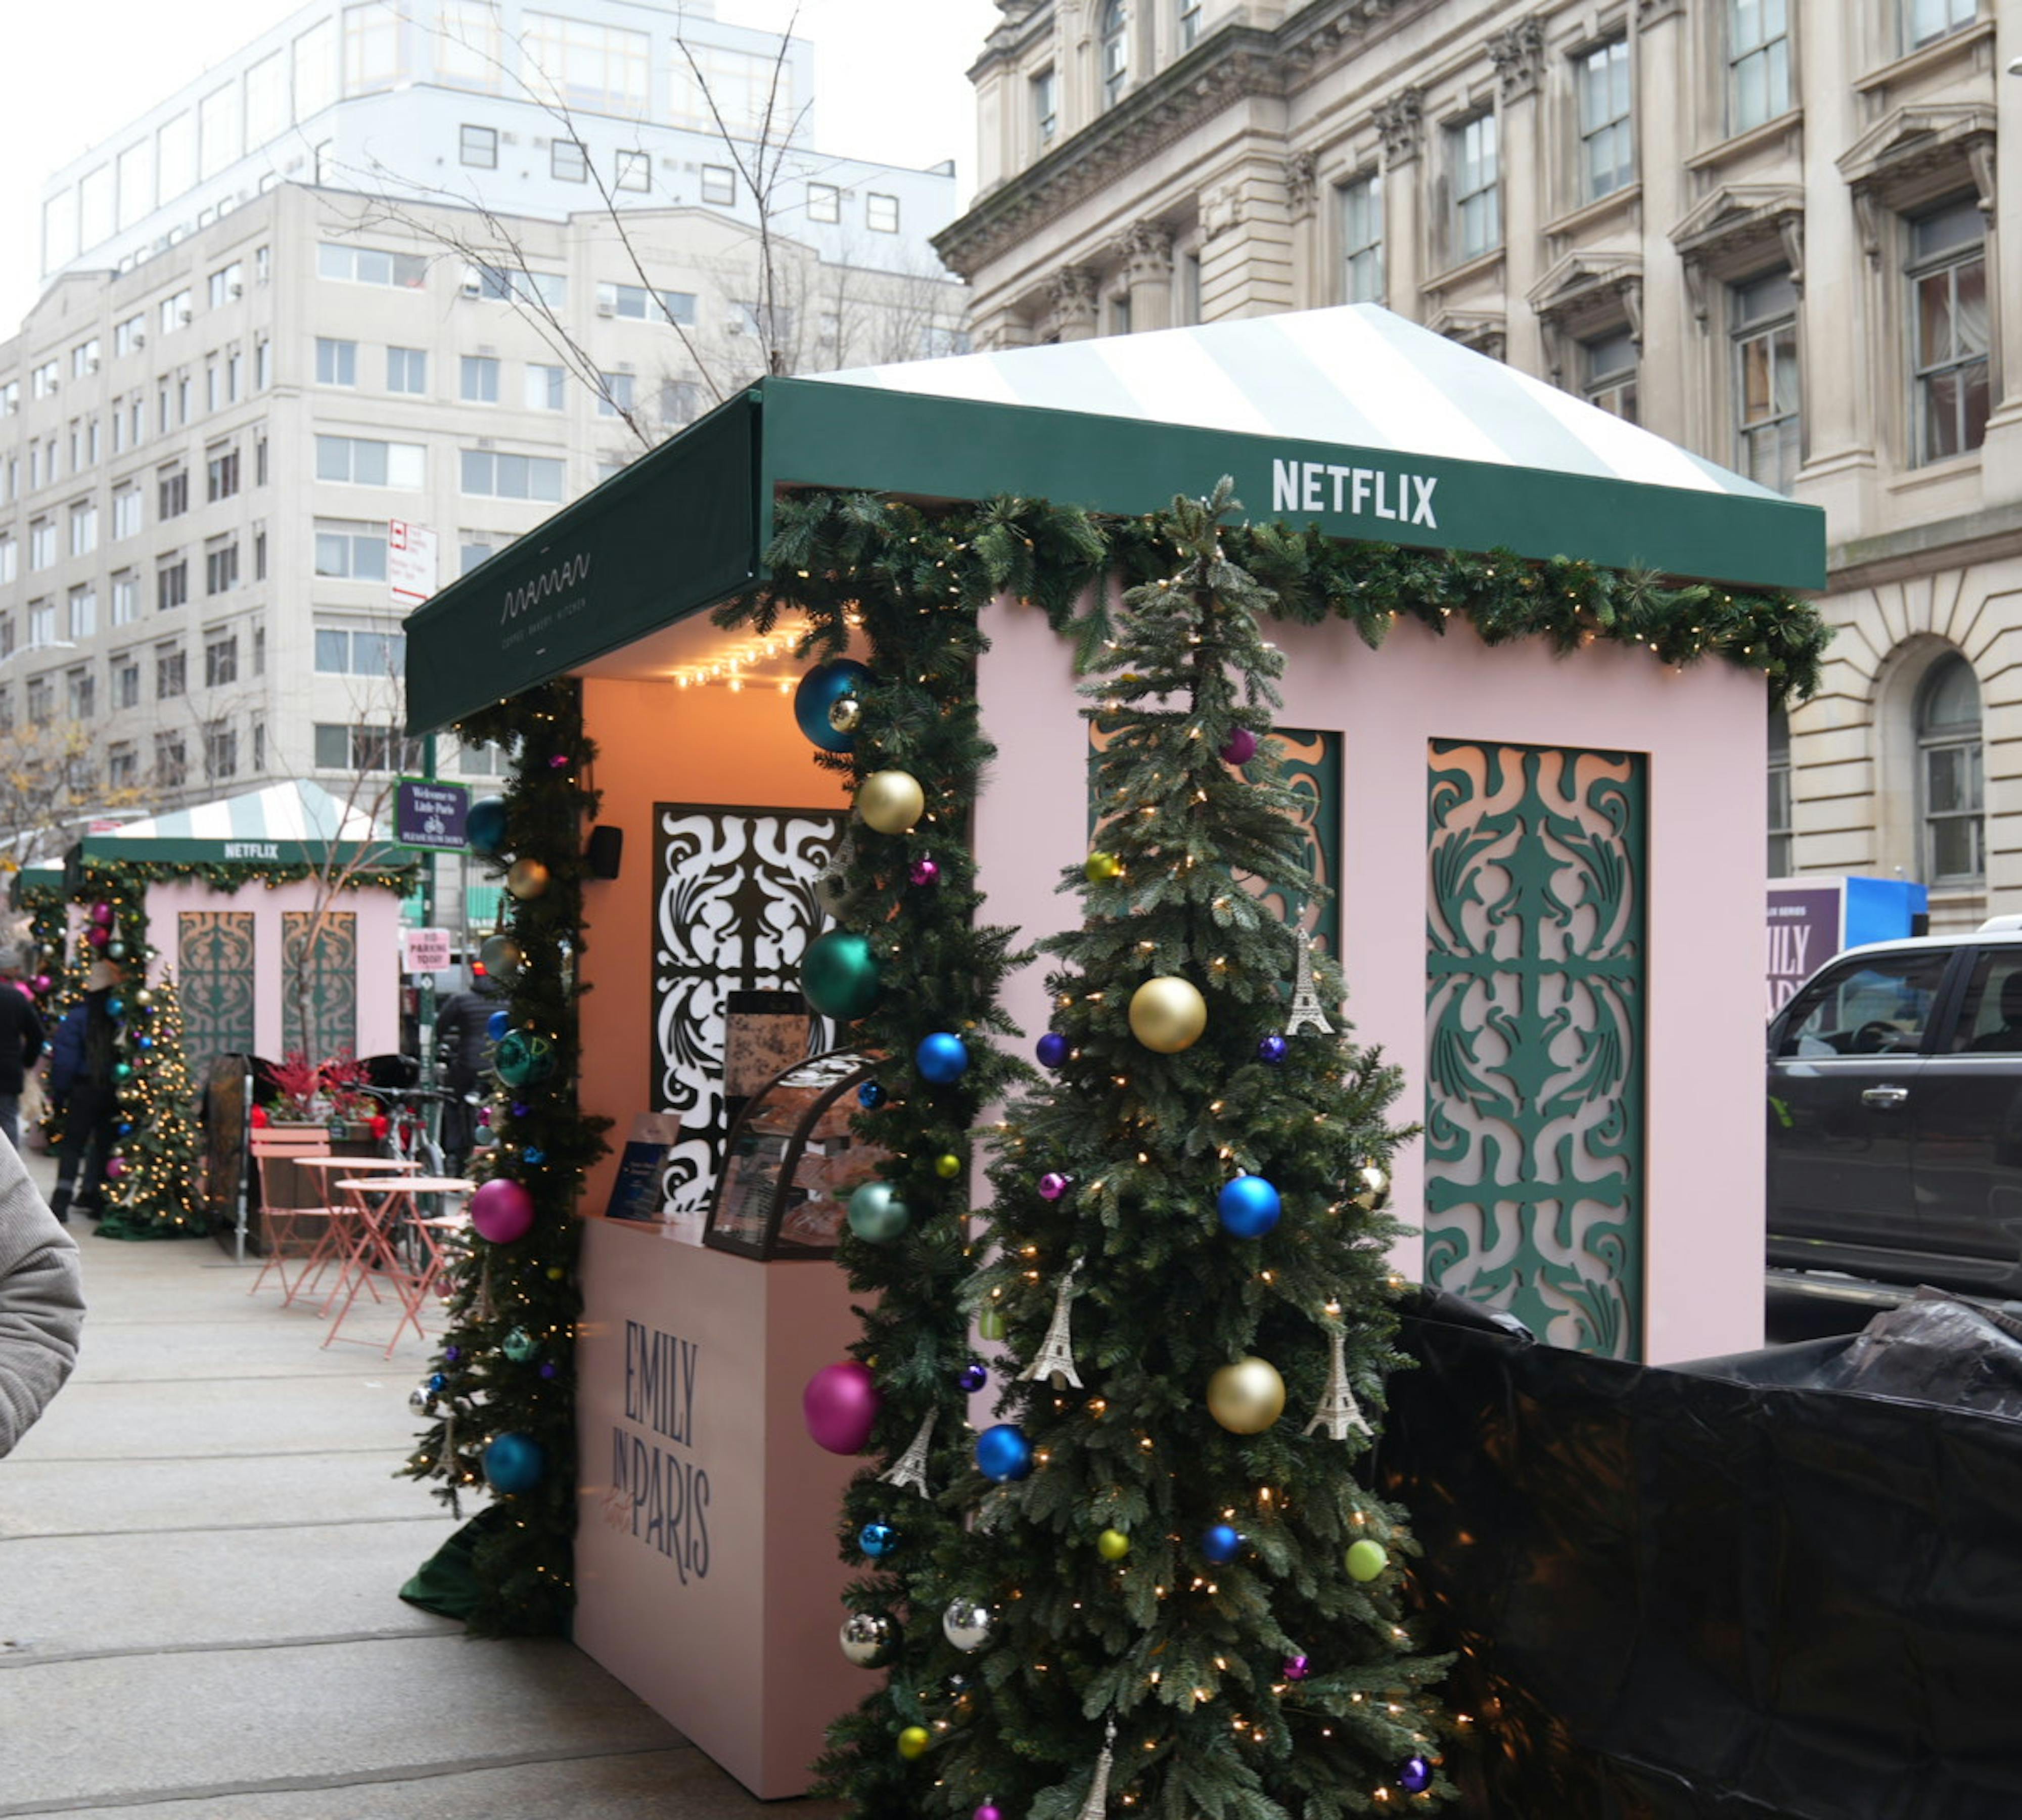 popup booth for Netflix's "emily in little paris" popup